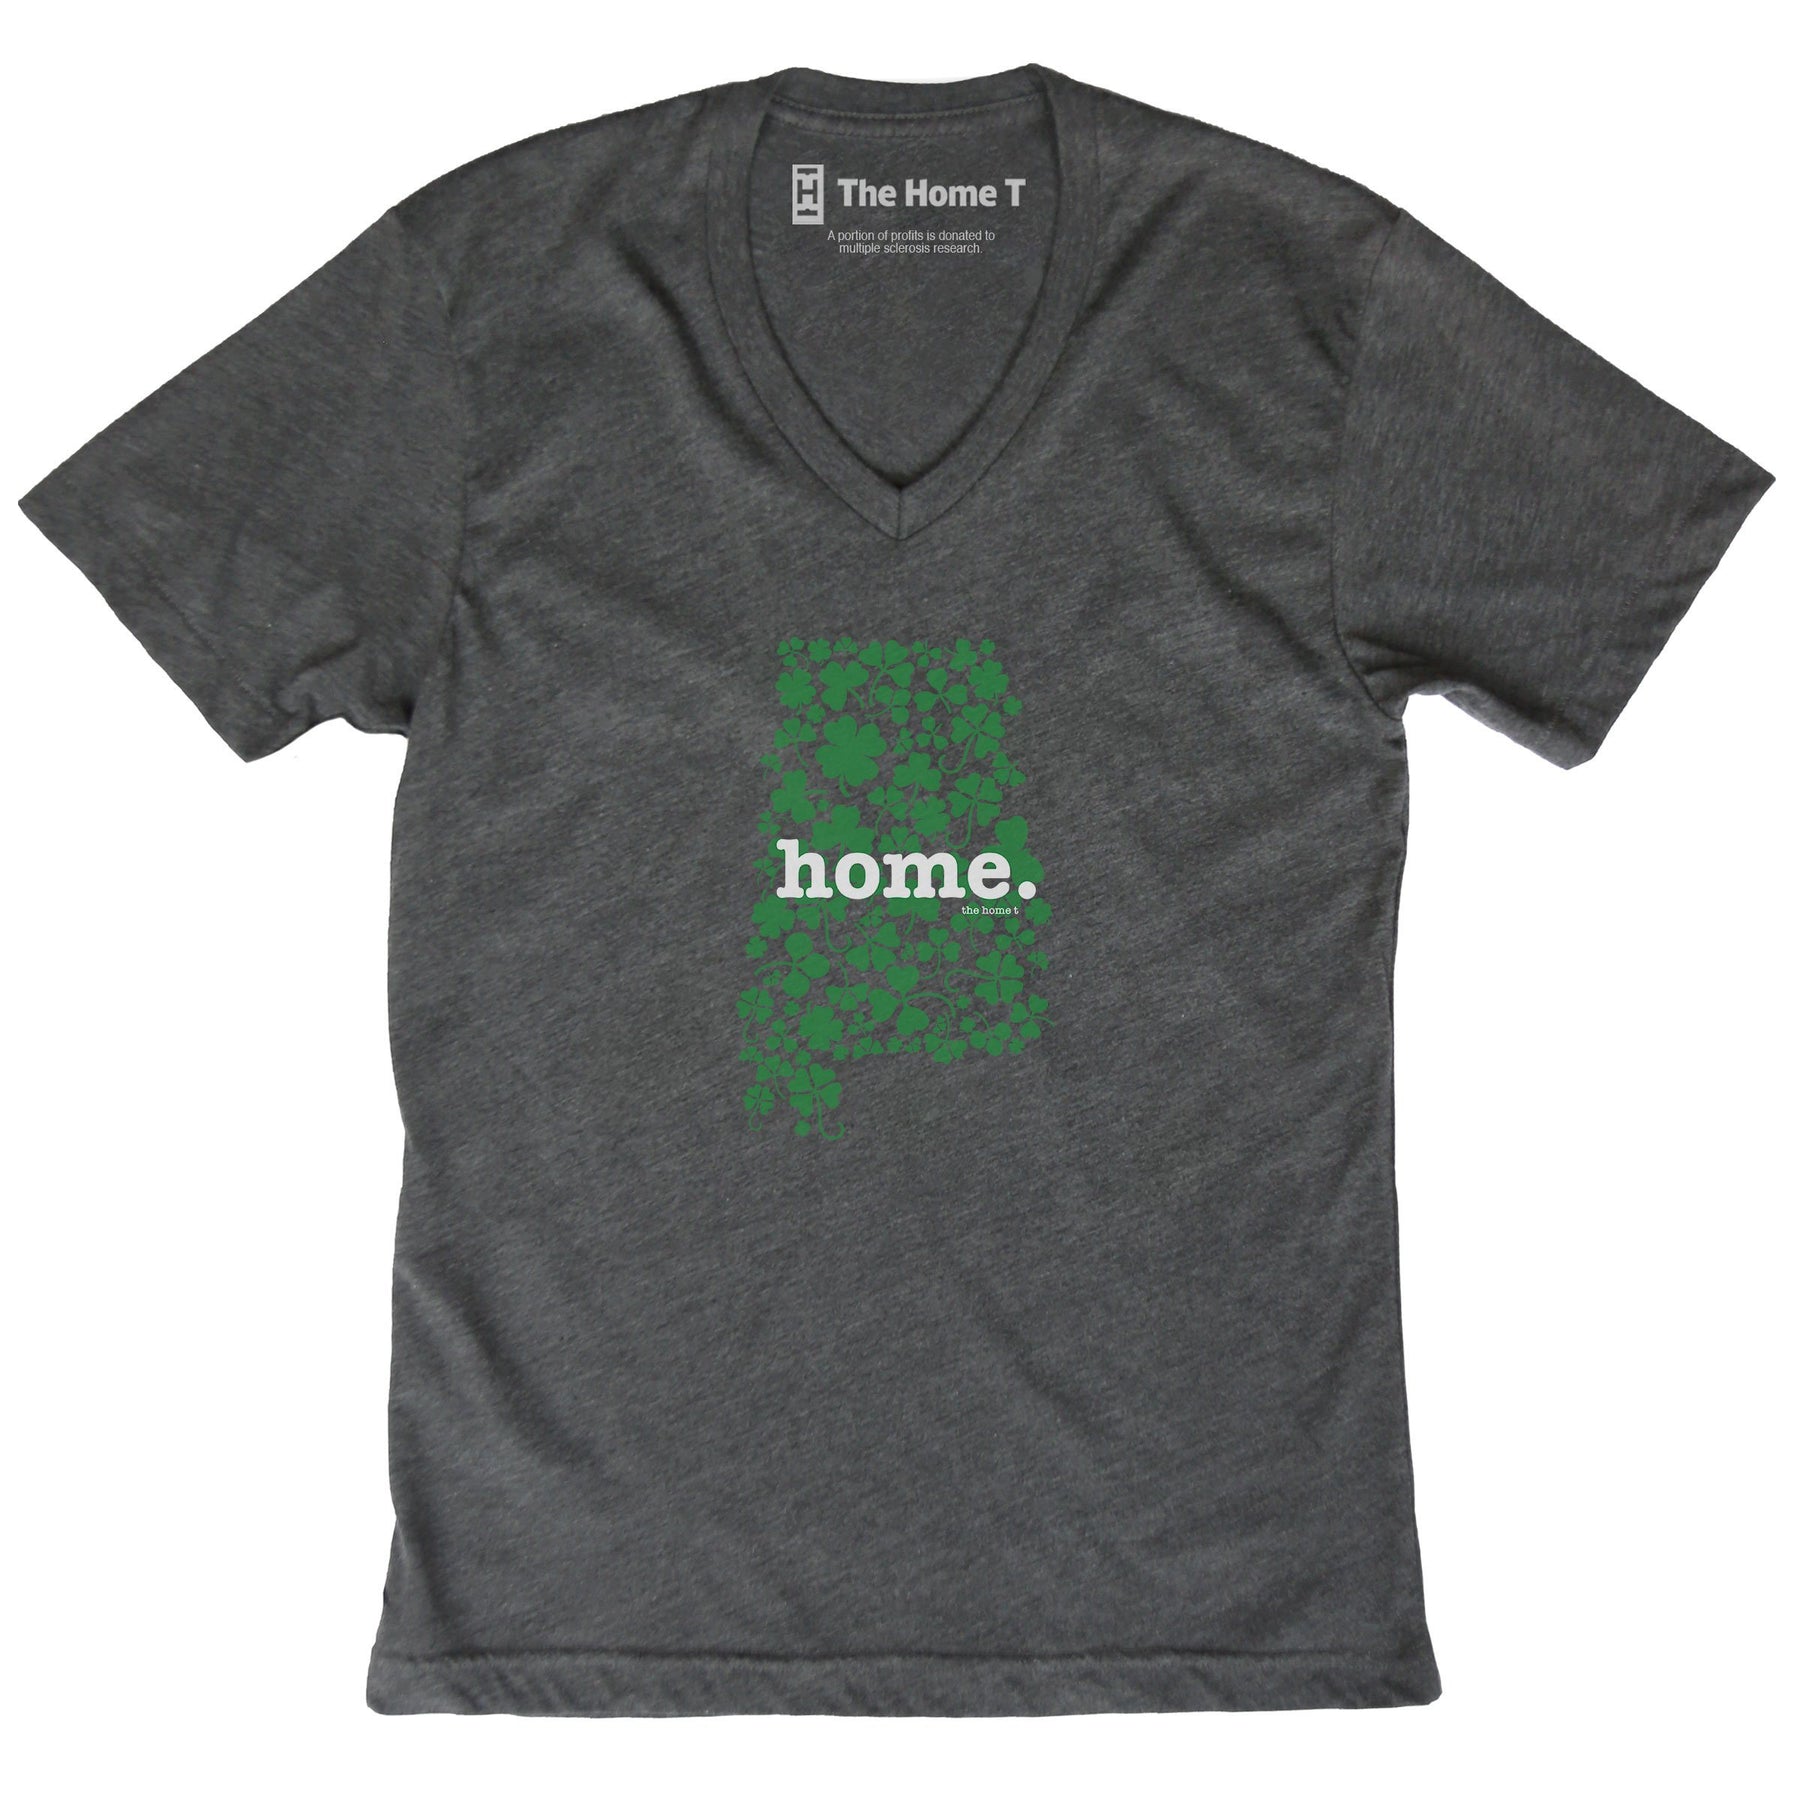 Alabama Home T Clovers Crew neck The Home T XS V Neck